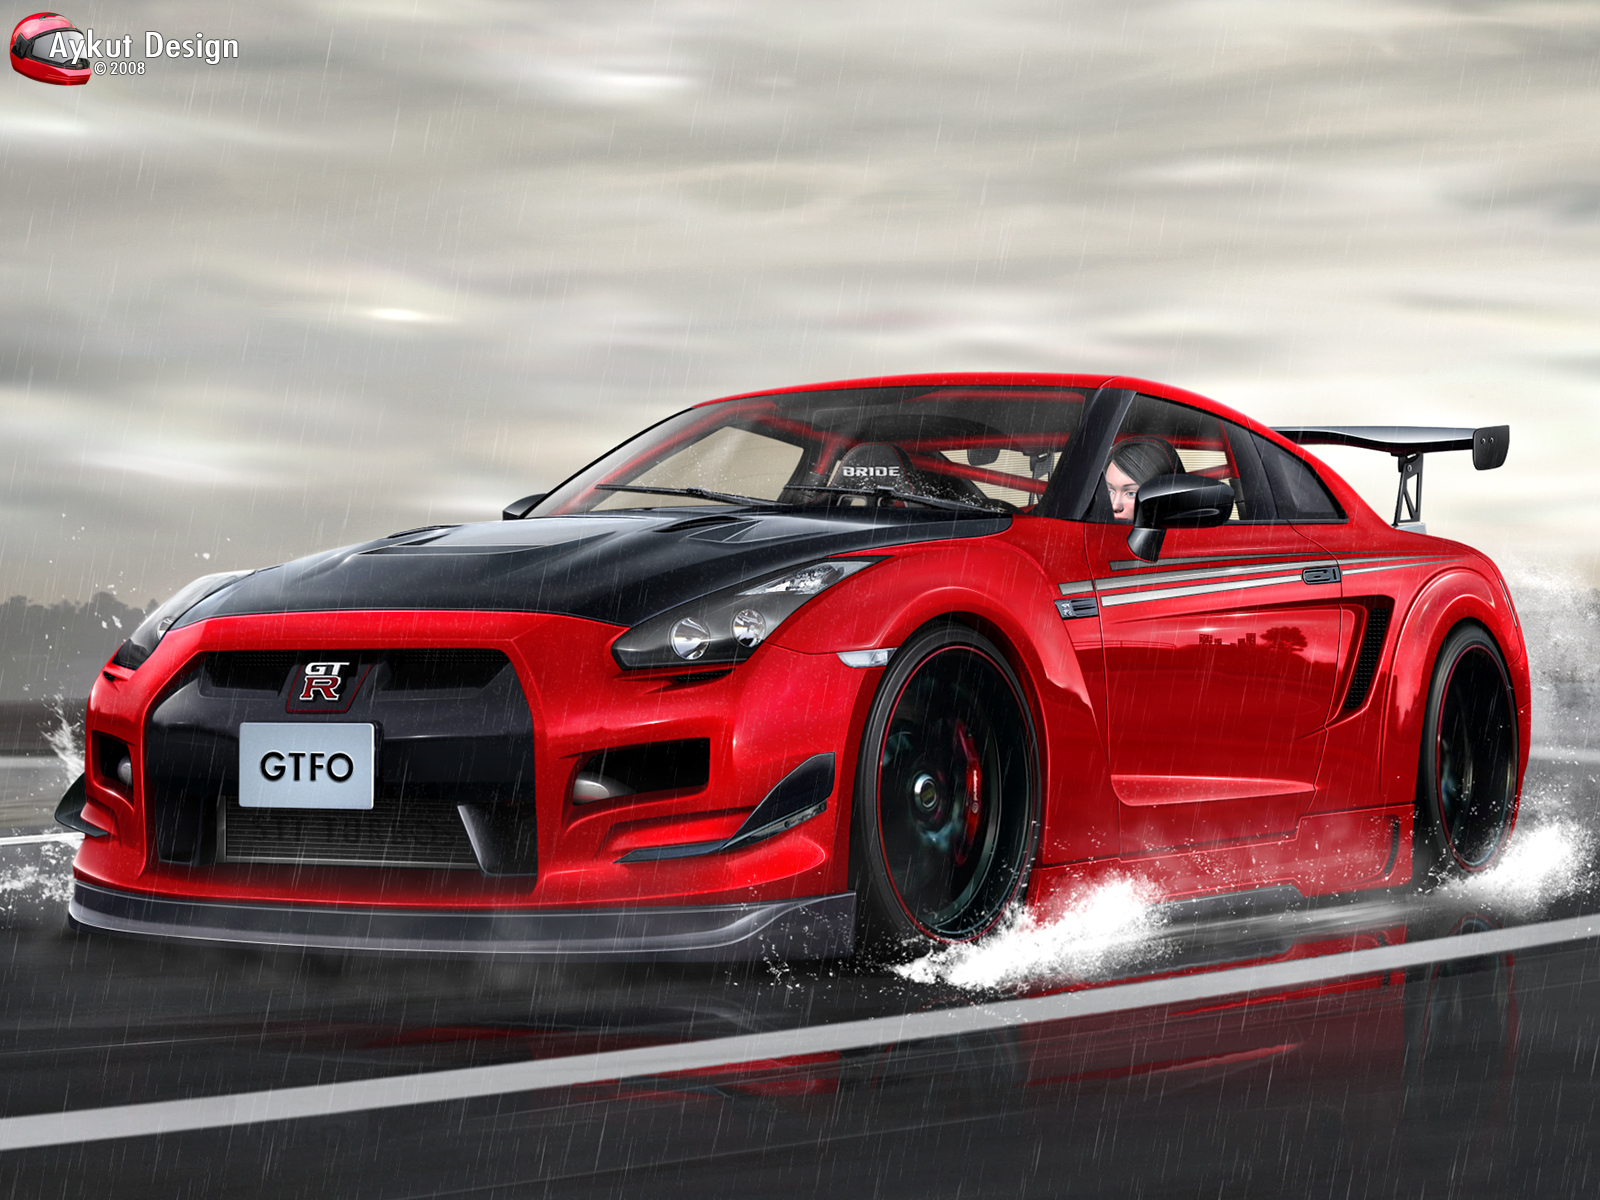 Nismo Wallpaper Full HD Pictures Nissan Gt R